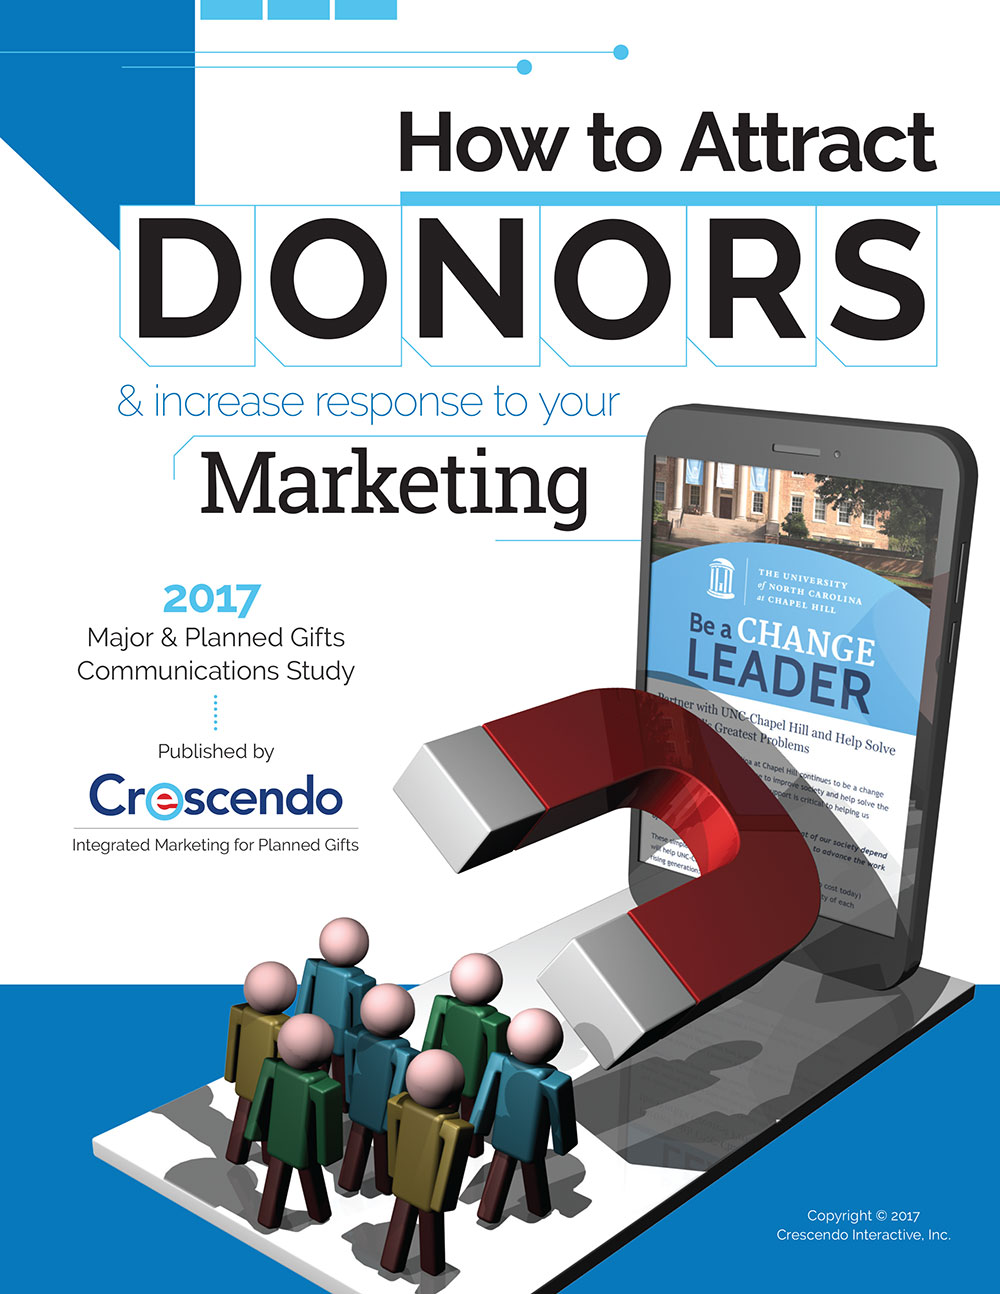 How to Attract Donors & Increase Response to Your Marketing